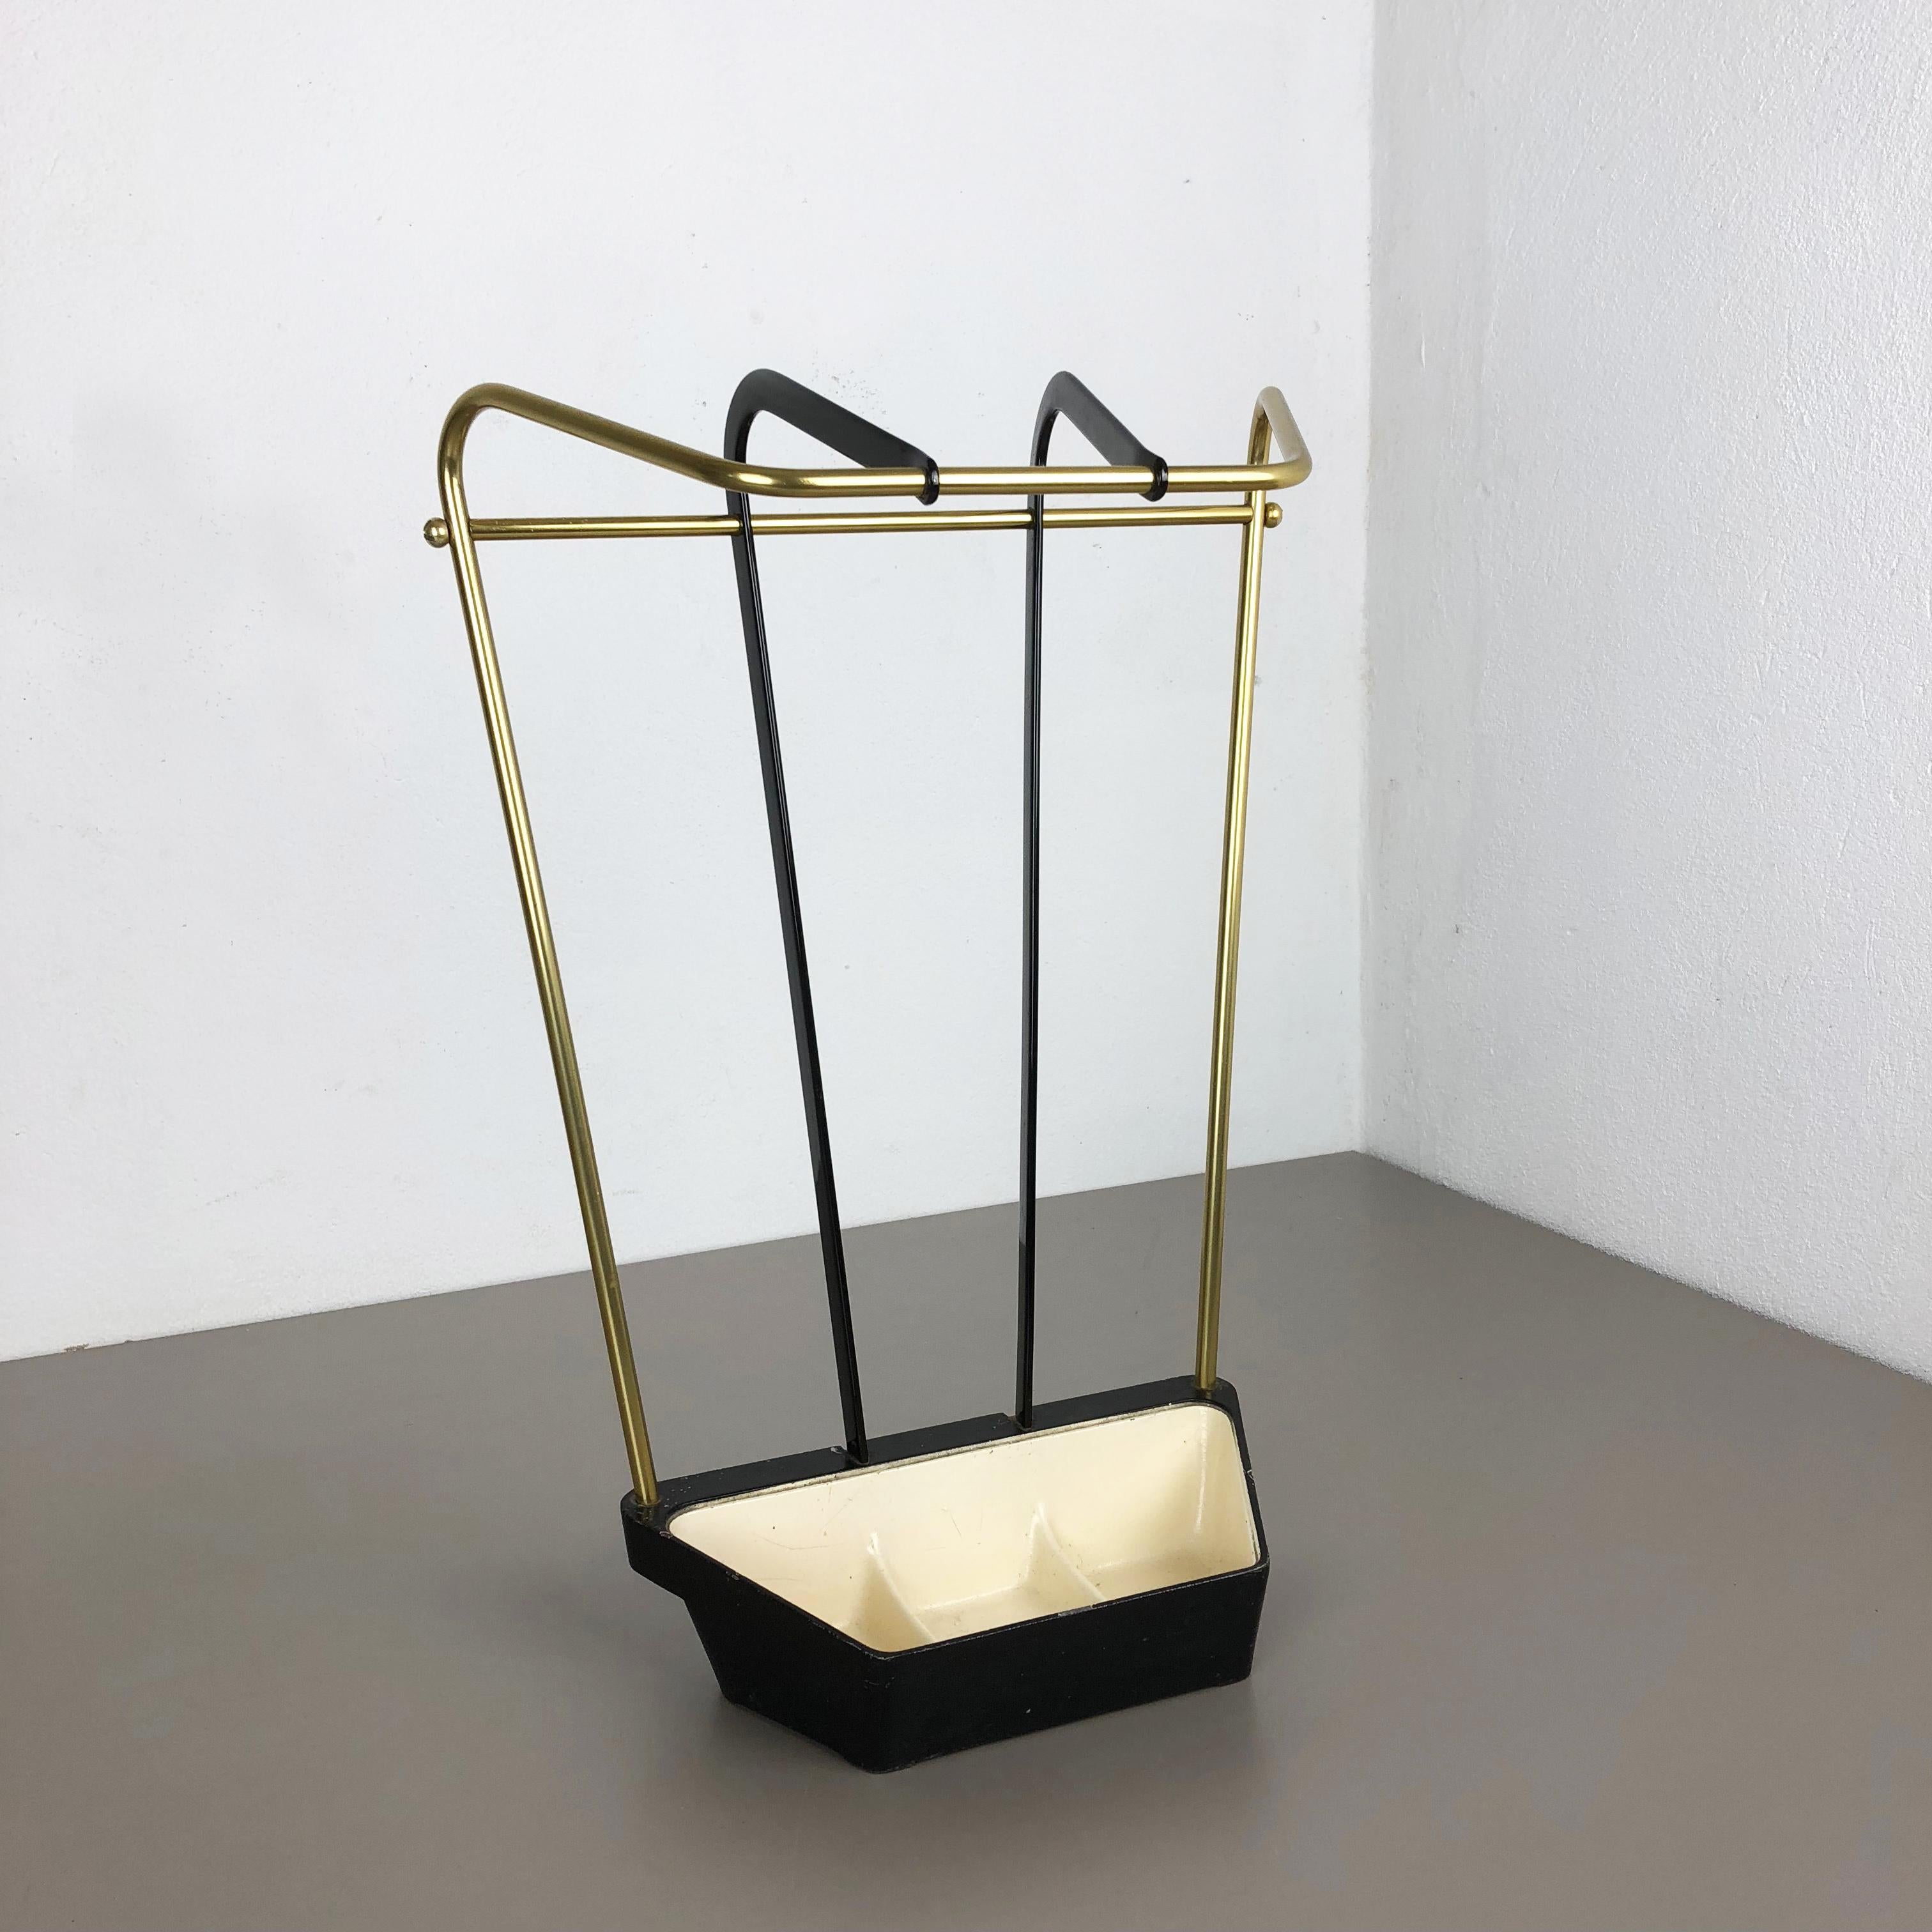 Article:

Bauhaus umbrella stand


Origin:

Germany


Age:

1950s


This original vintage Bauhaus style umbrella Stand was produced in the 1950s in Germany. it is made of solid metal with brass applications at the top and upright